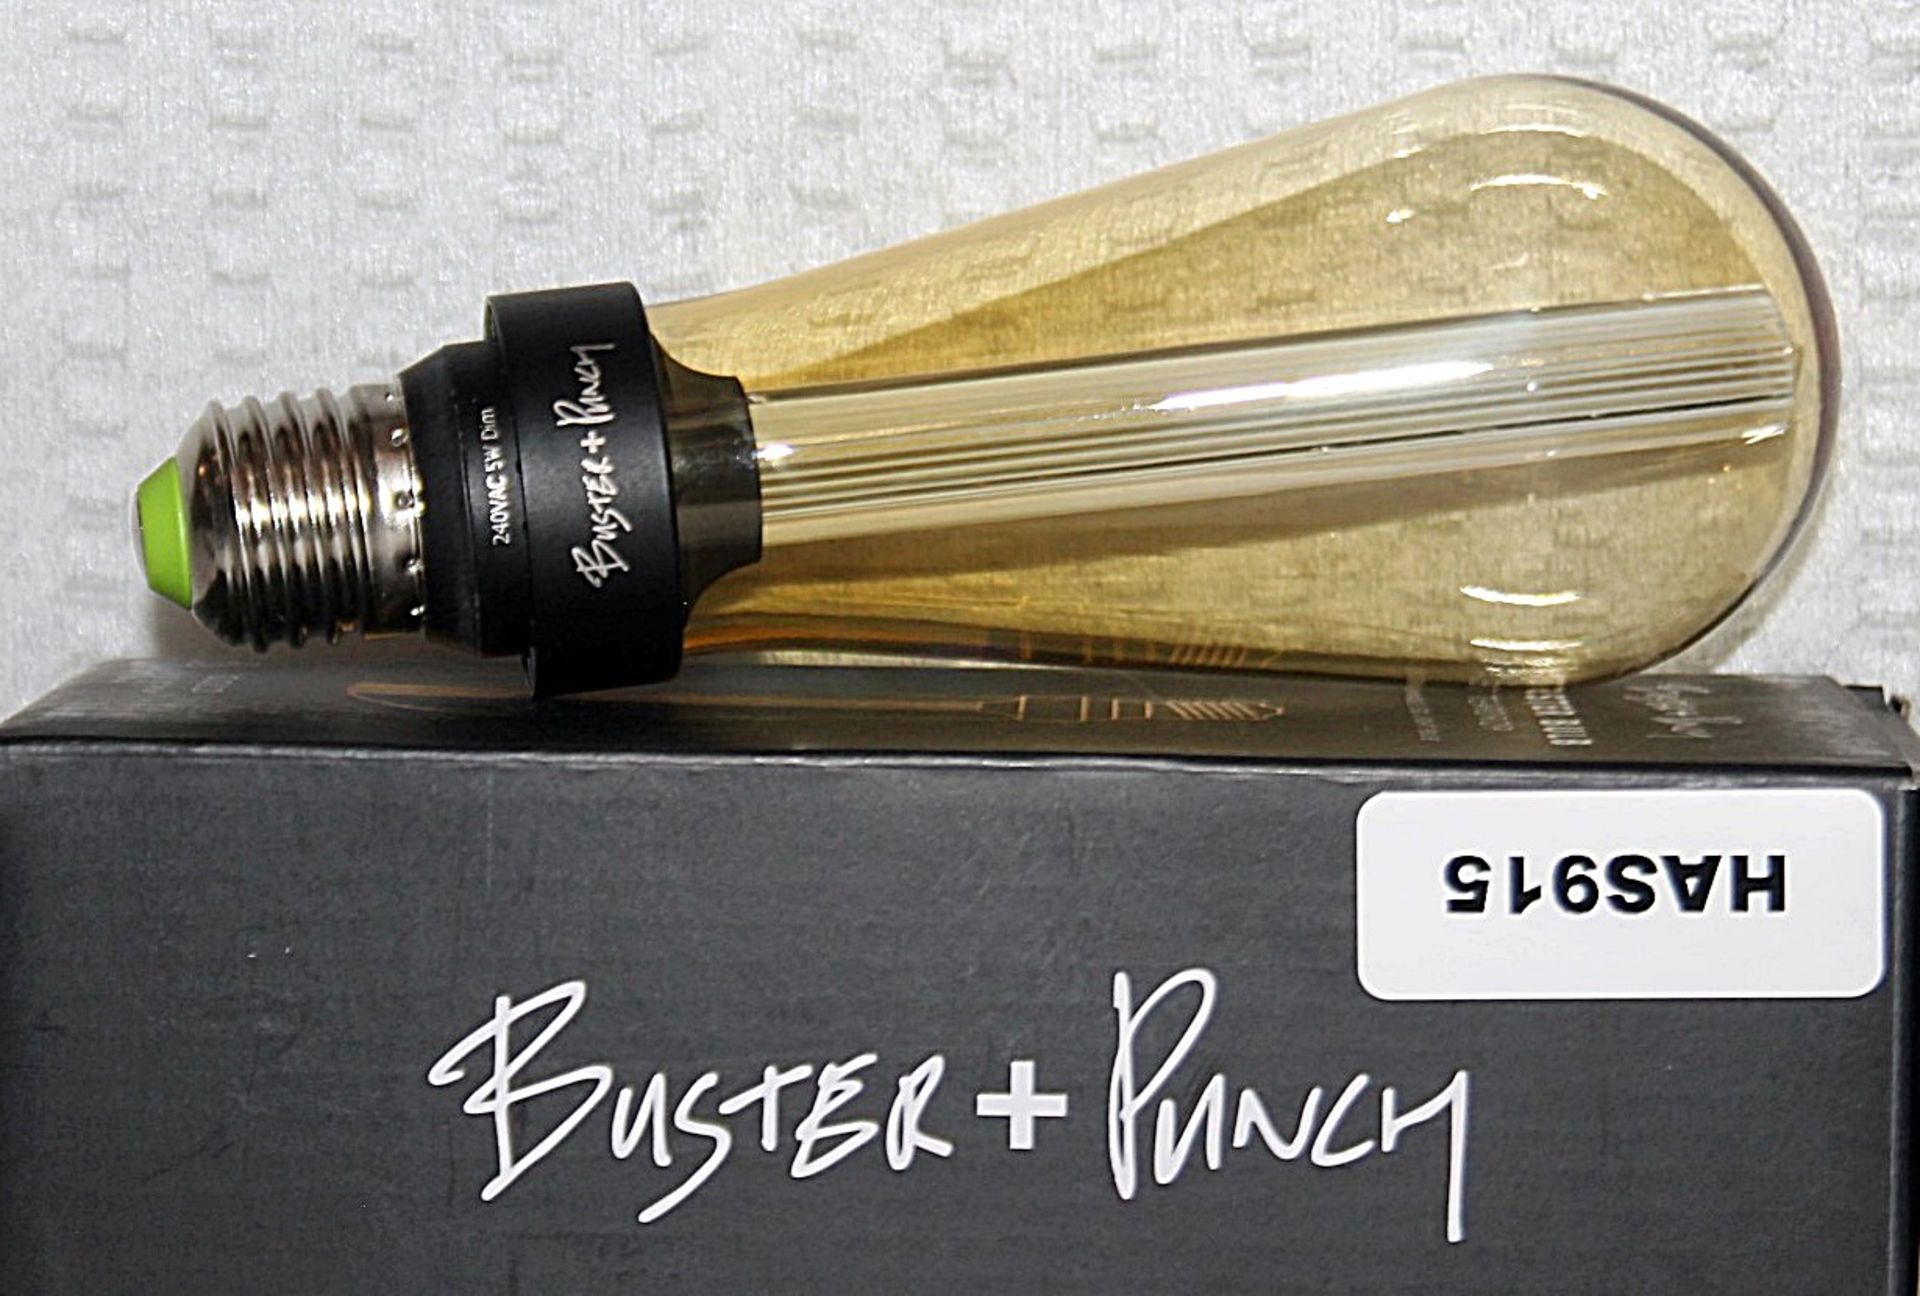 2 x BUSTER + PUNCH Designer Dimmable 'Teardrop' E27 Light Bulbs (Gold) - Total Original Price £69.98 - Image 4 of 10